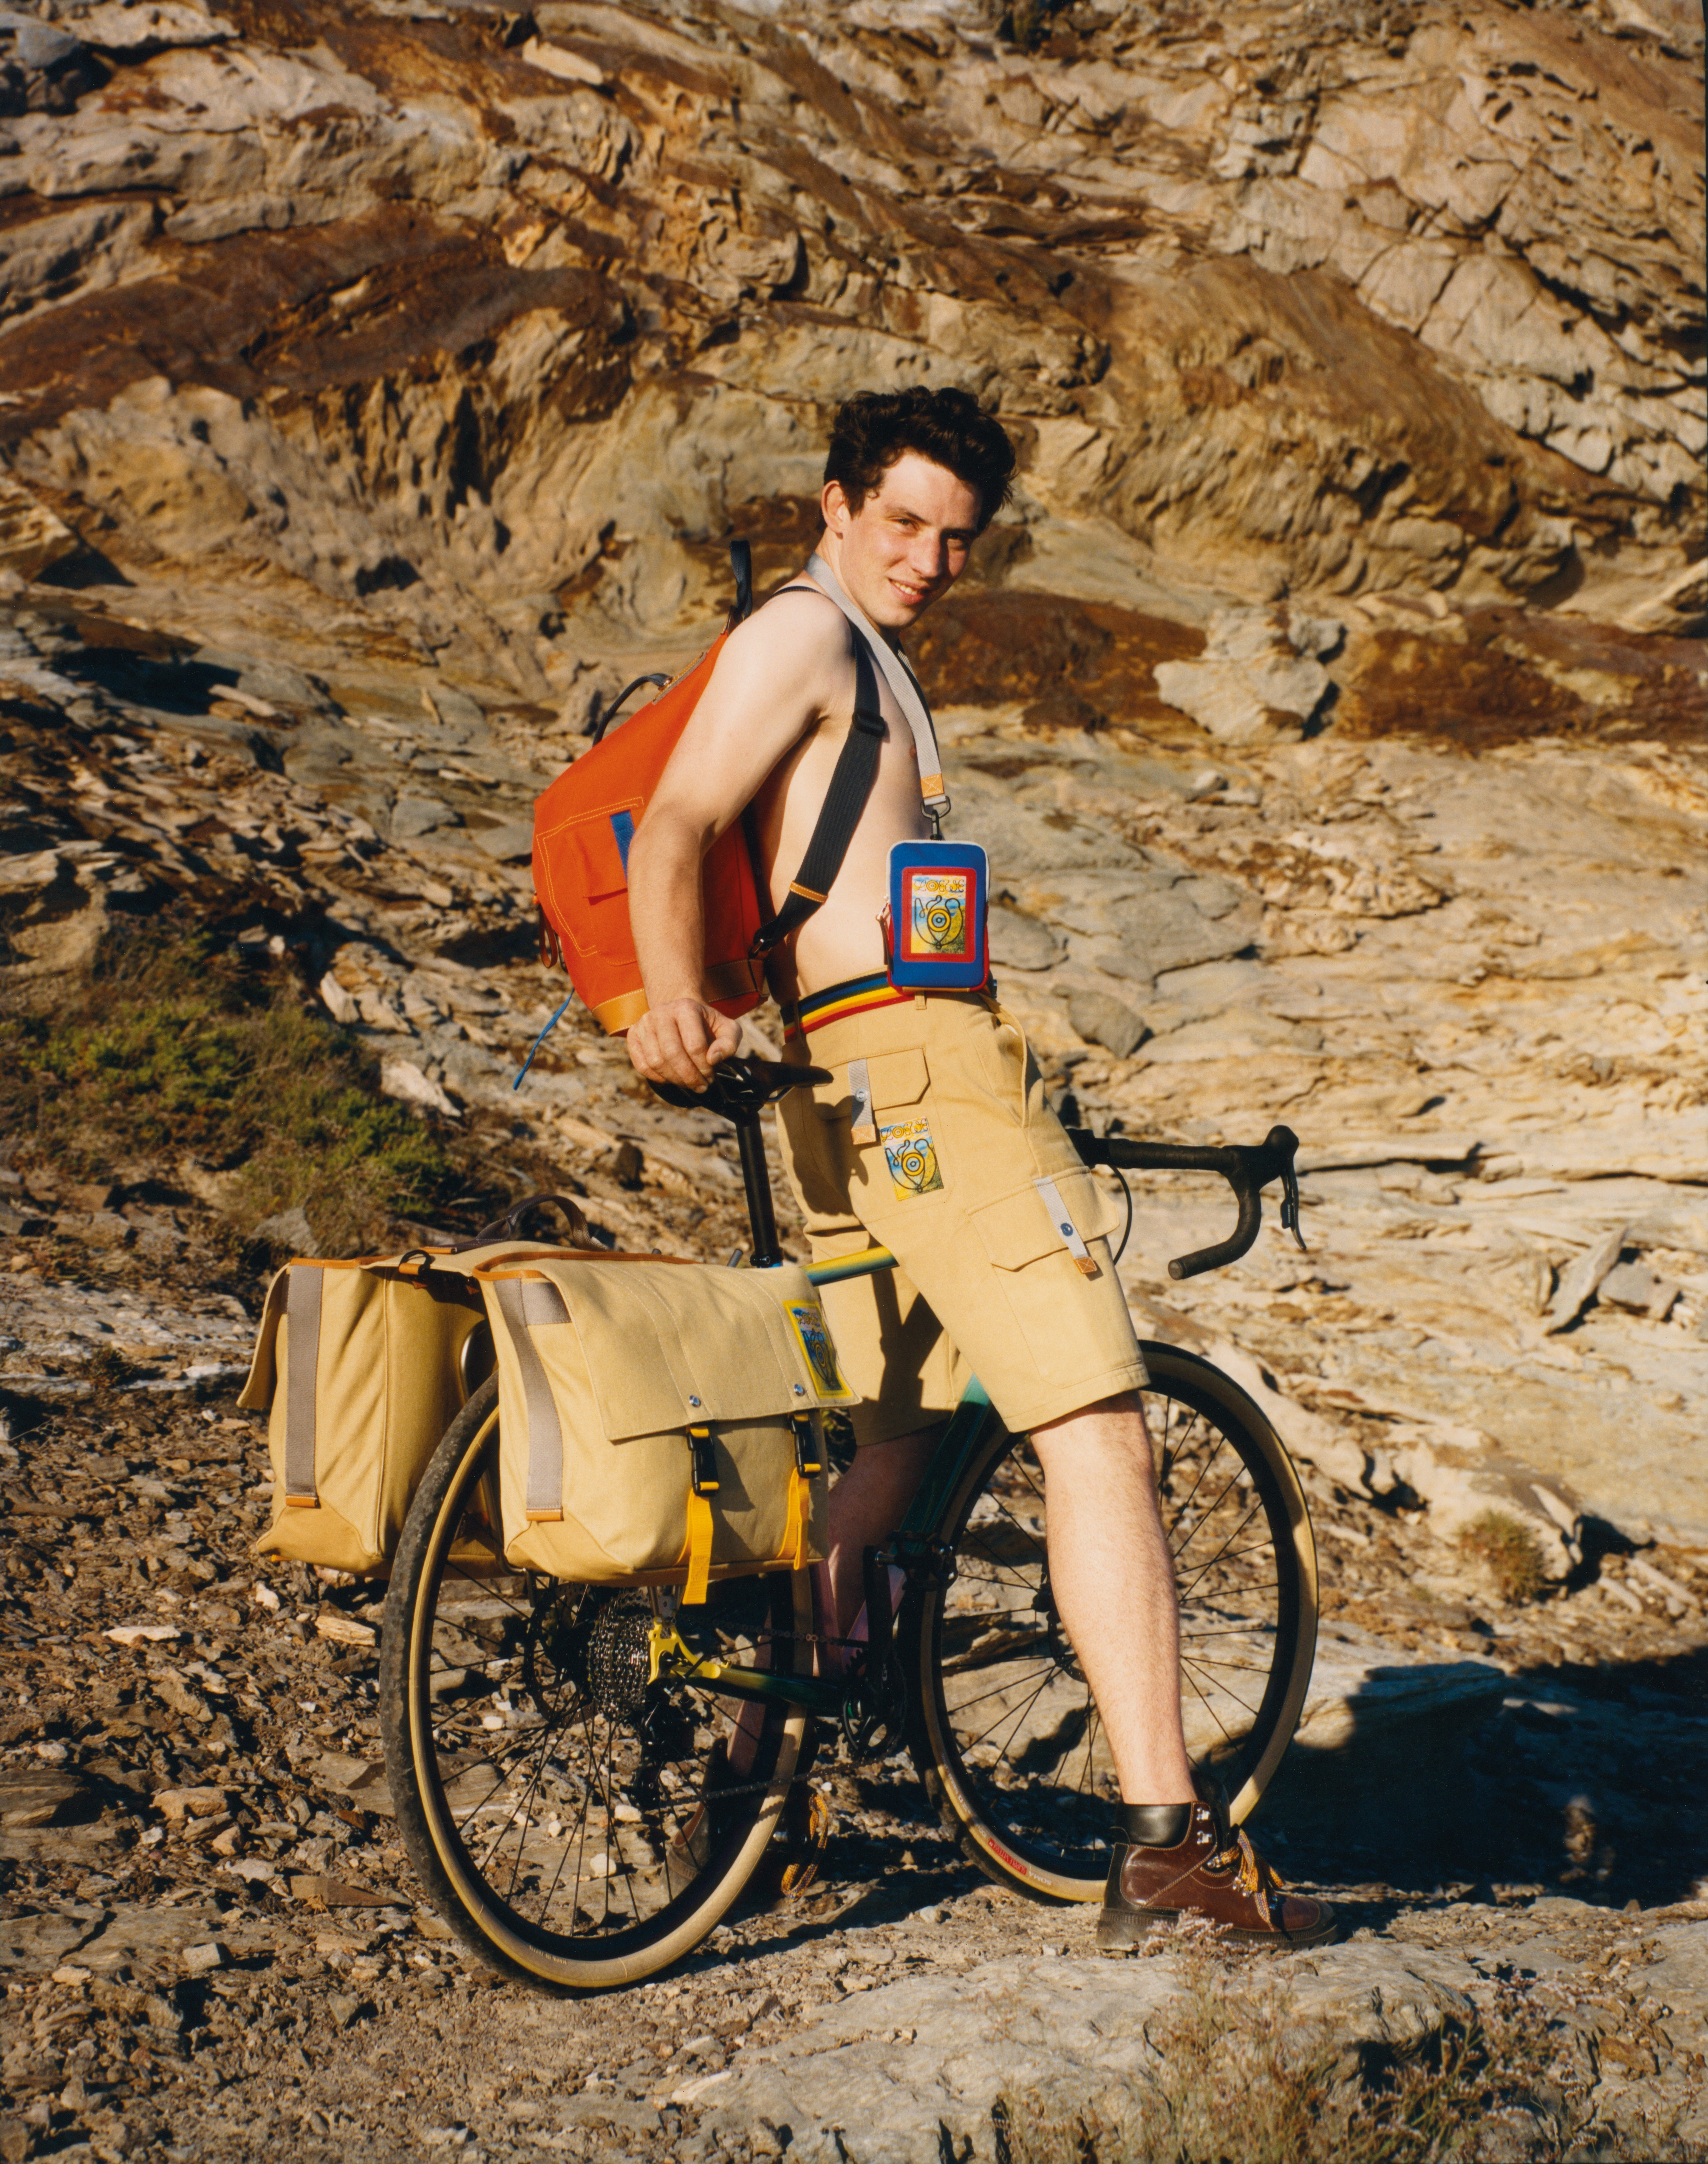 Loewe’s new menswear and accessories campaign features British actor Josh O’Connor in the wilds of Spain.